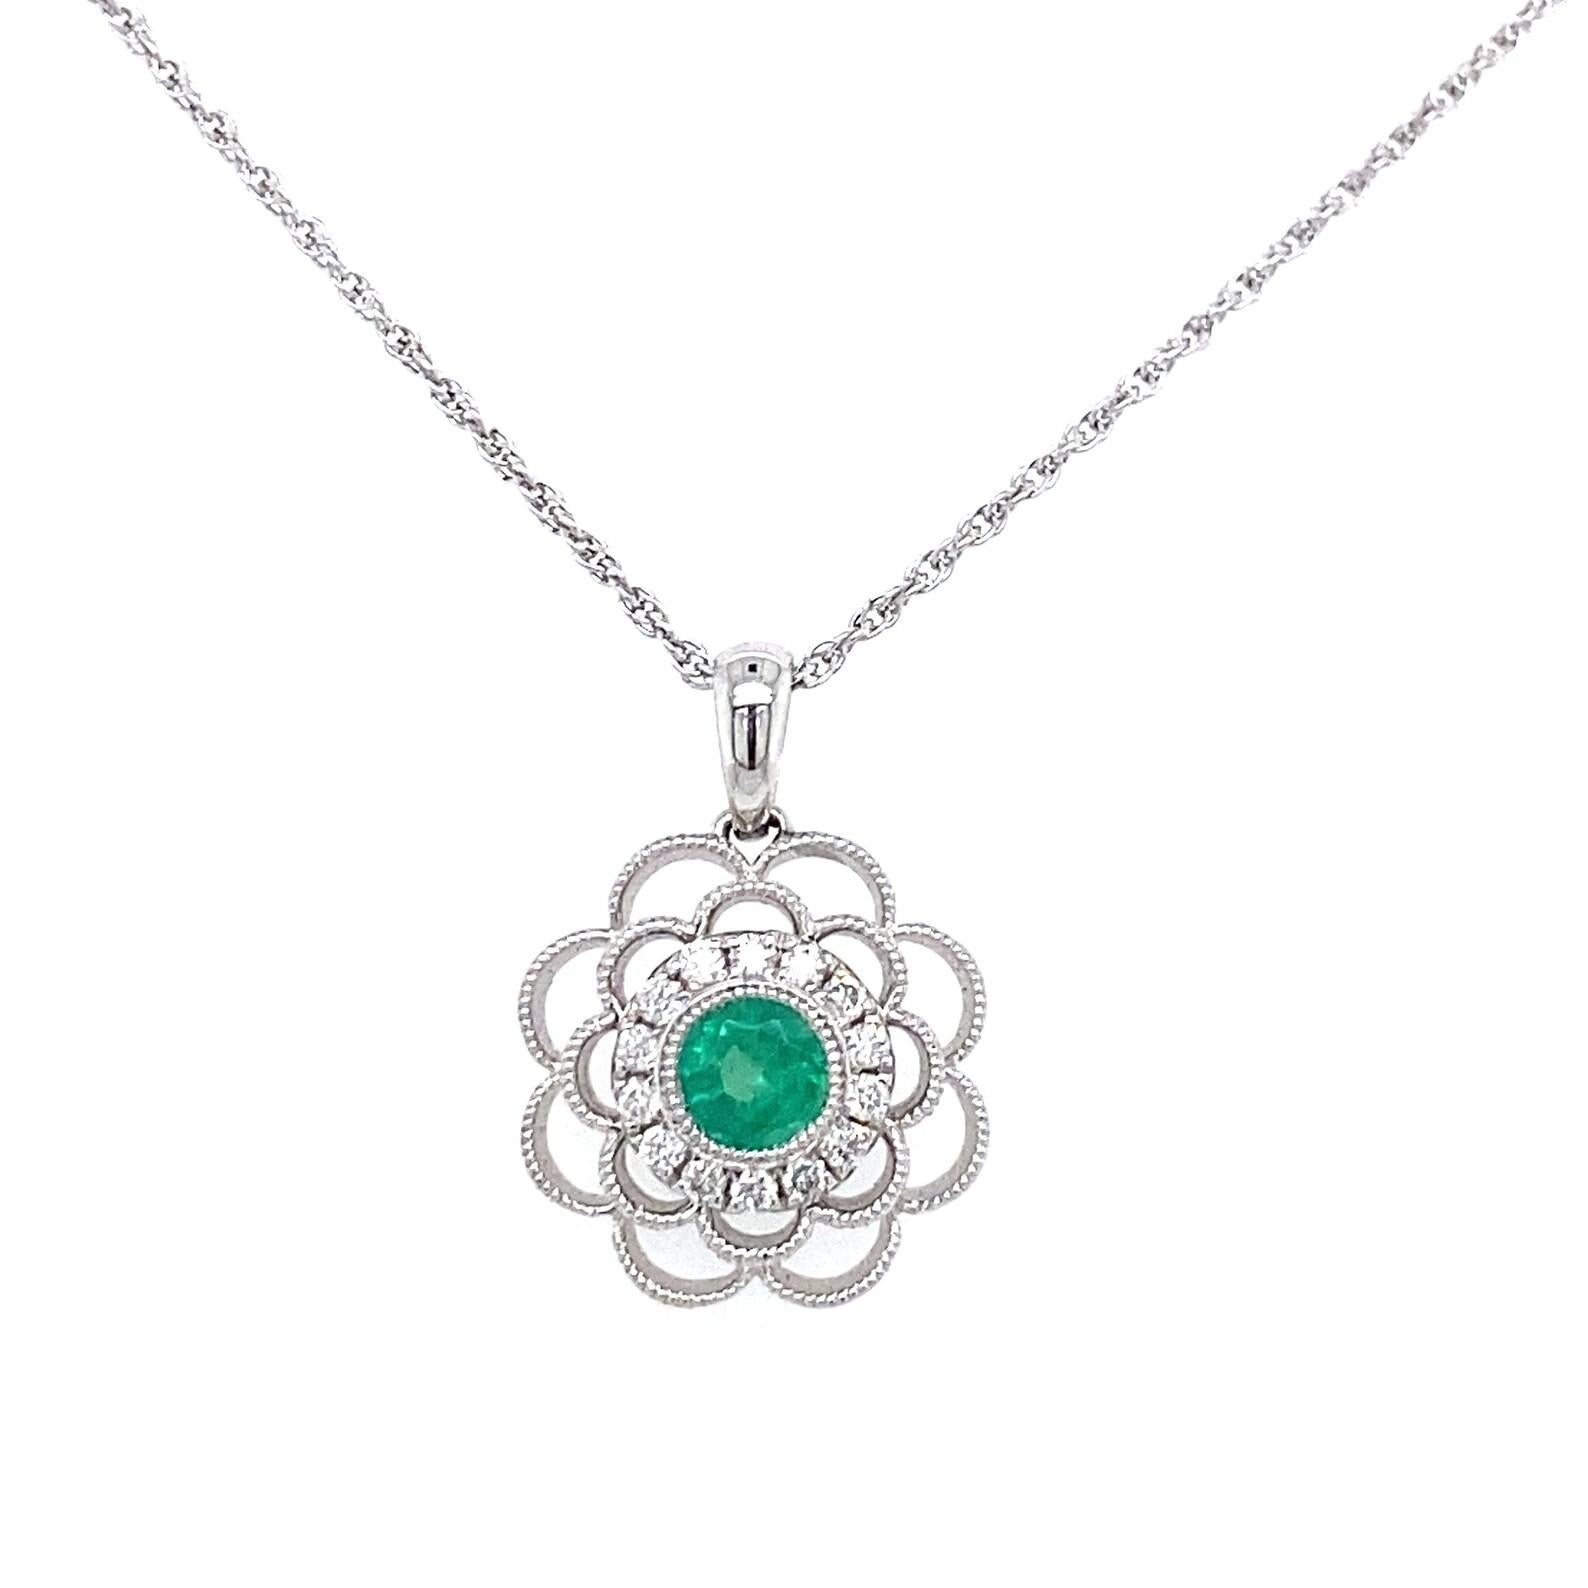 Emerald and Diamond Pendant in 14K White Gold
Crafted in 14K White Gold. Featuring a Natural Green Emerald, with Diamond Pave (H Color, SI Clarity).
This pendant arrives ready to wear on an 16